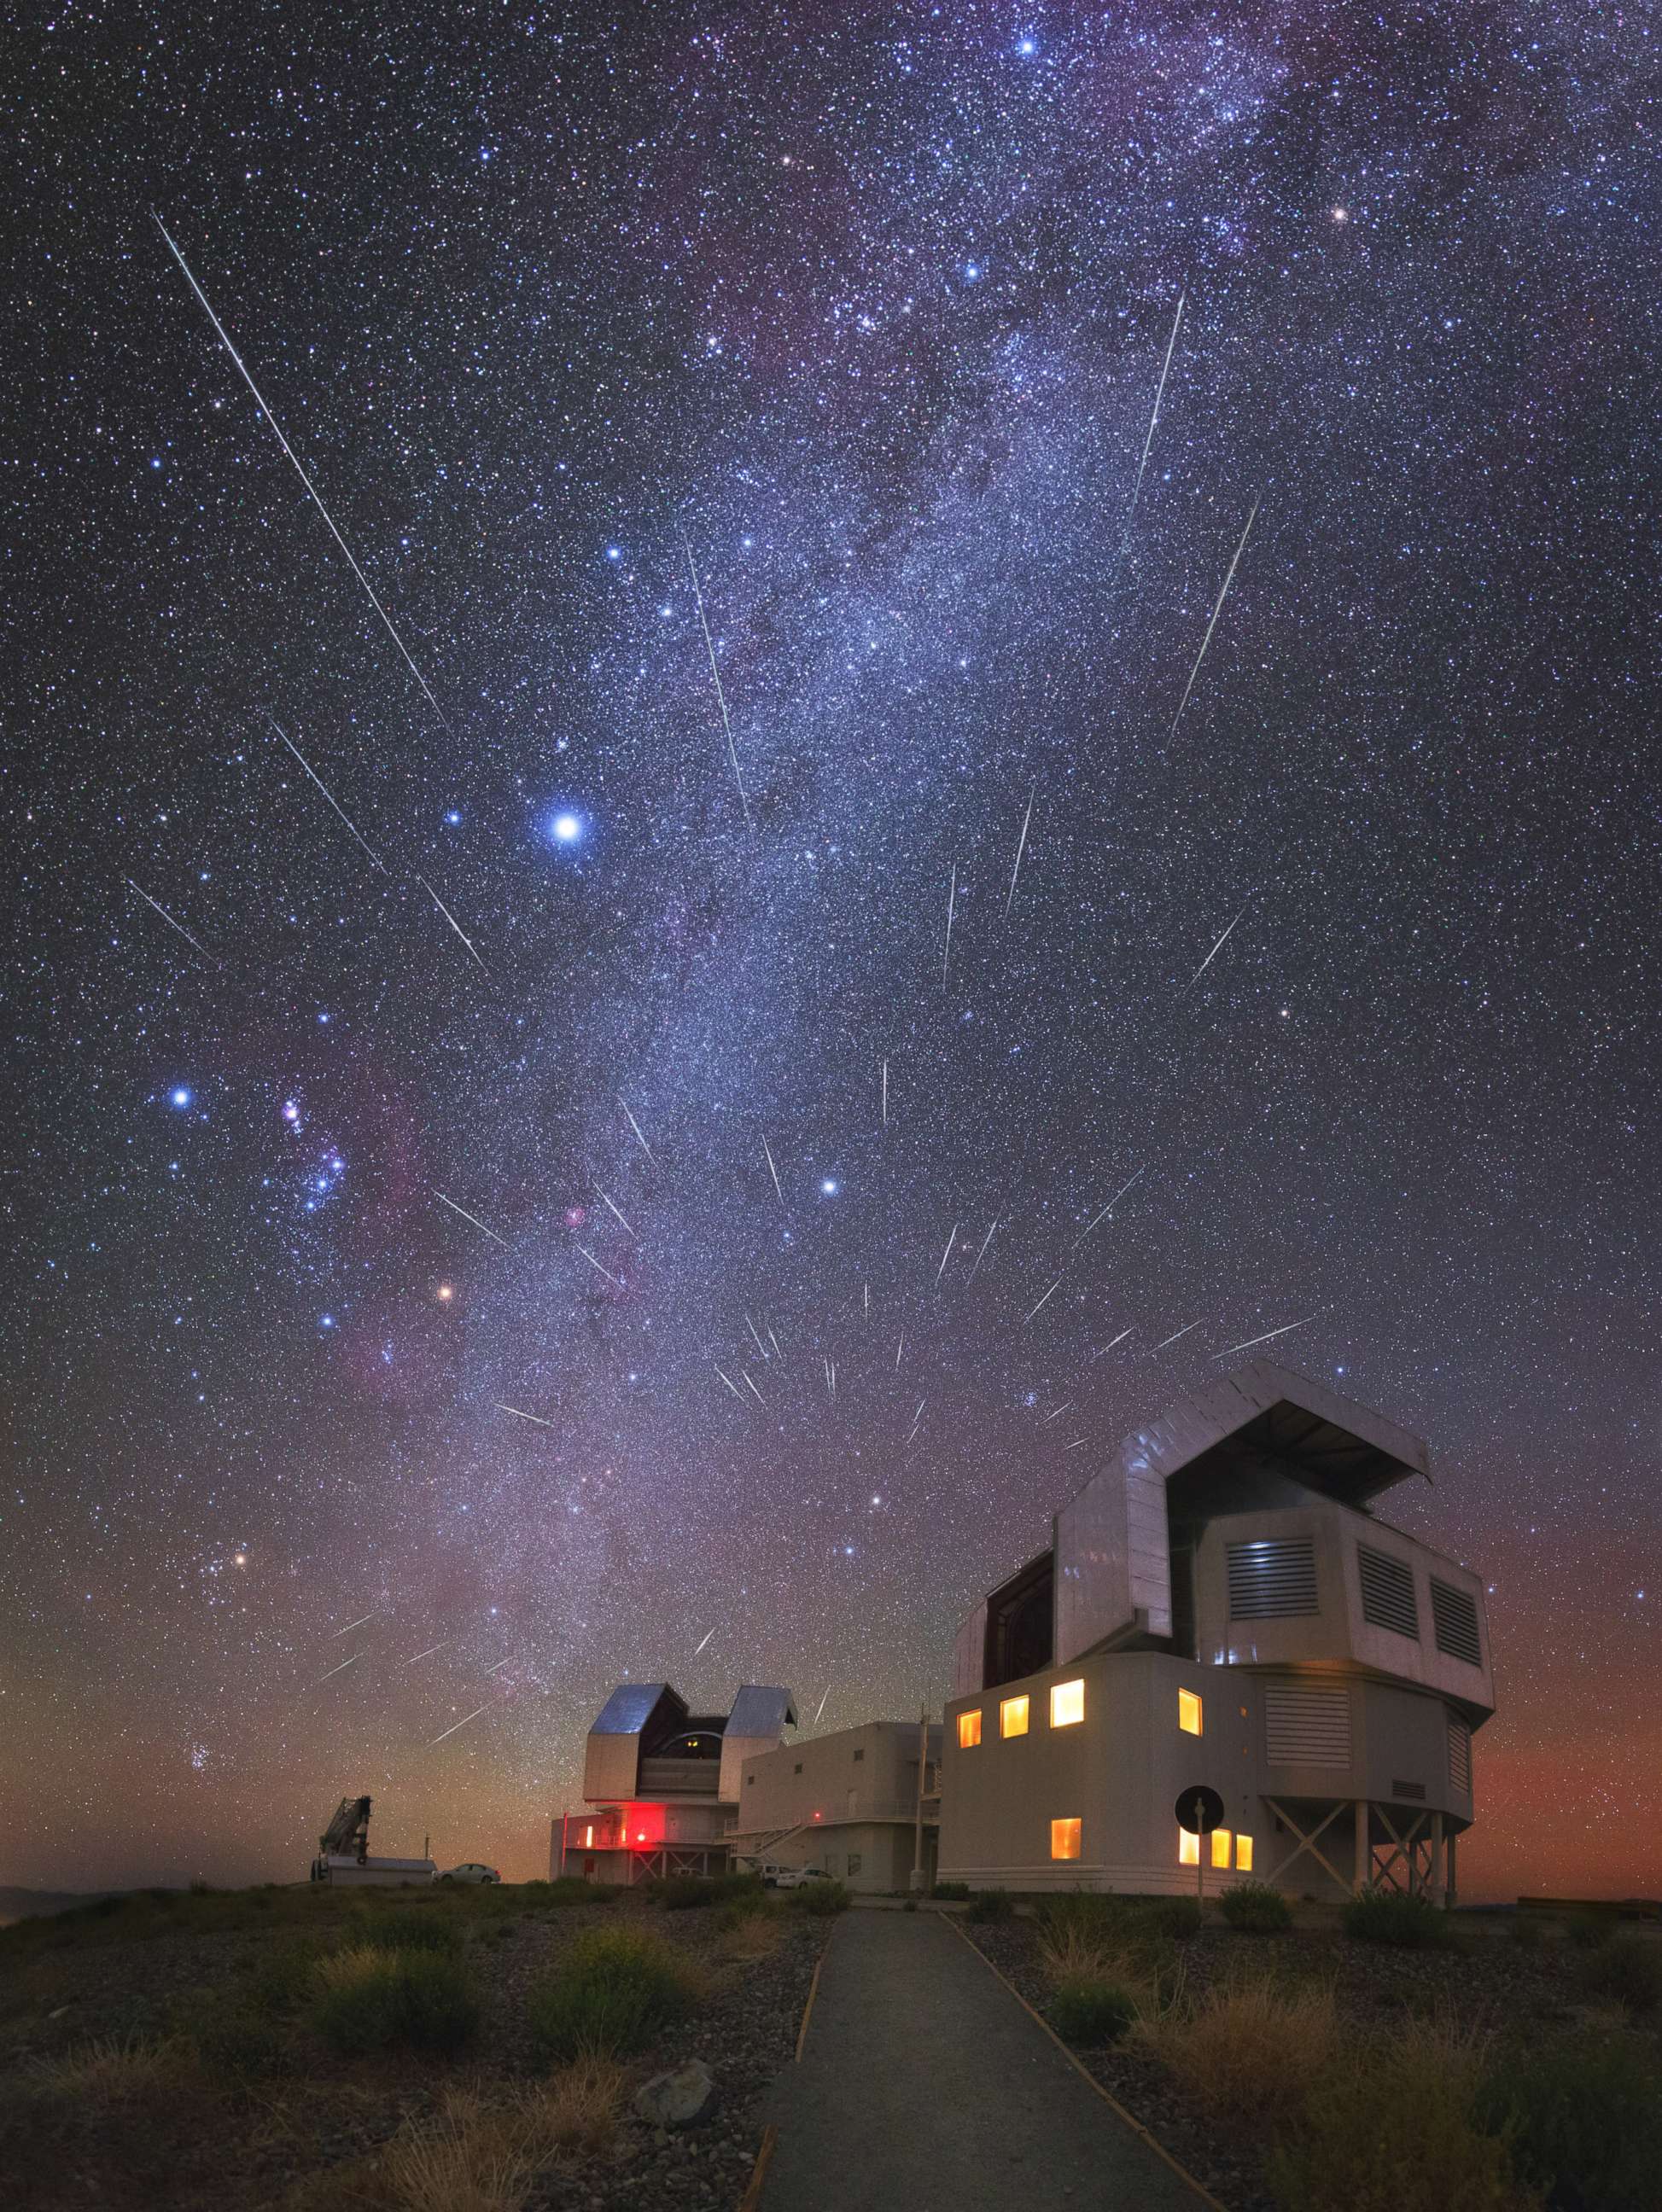 PHOTO: The radiant Geminid meteor shower over the Carnegie Las Campanas observatory, near the Atacama desert in Chile, Dec. 14, 2015. The Milky Way and bright stars, Rigel in Orion constellation, and Sirius in Canis Major constellation, shine brightly.